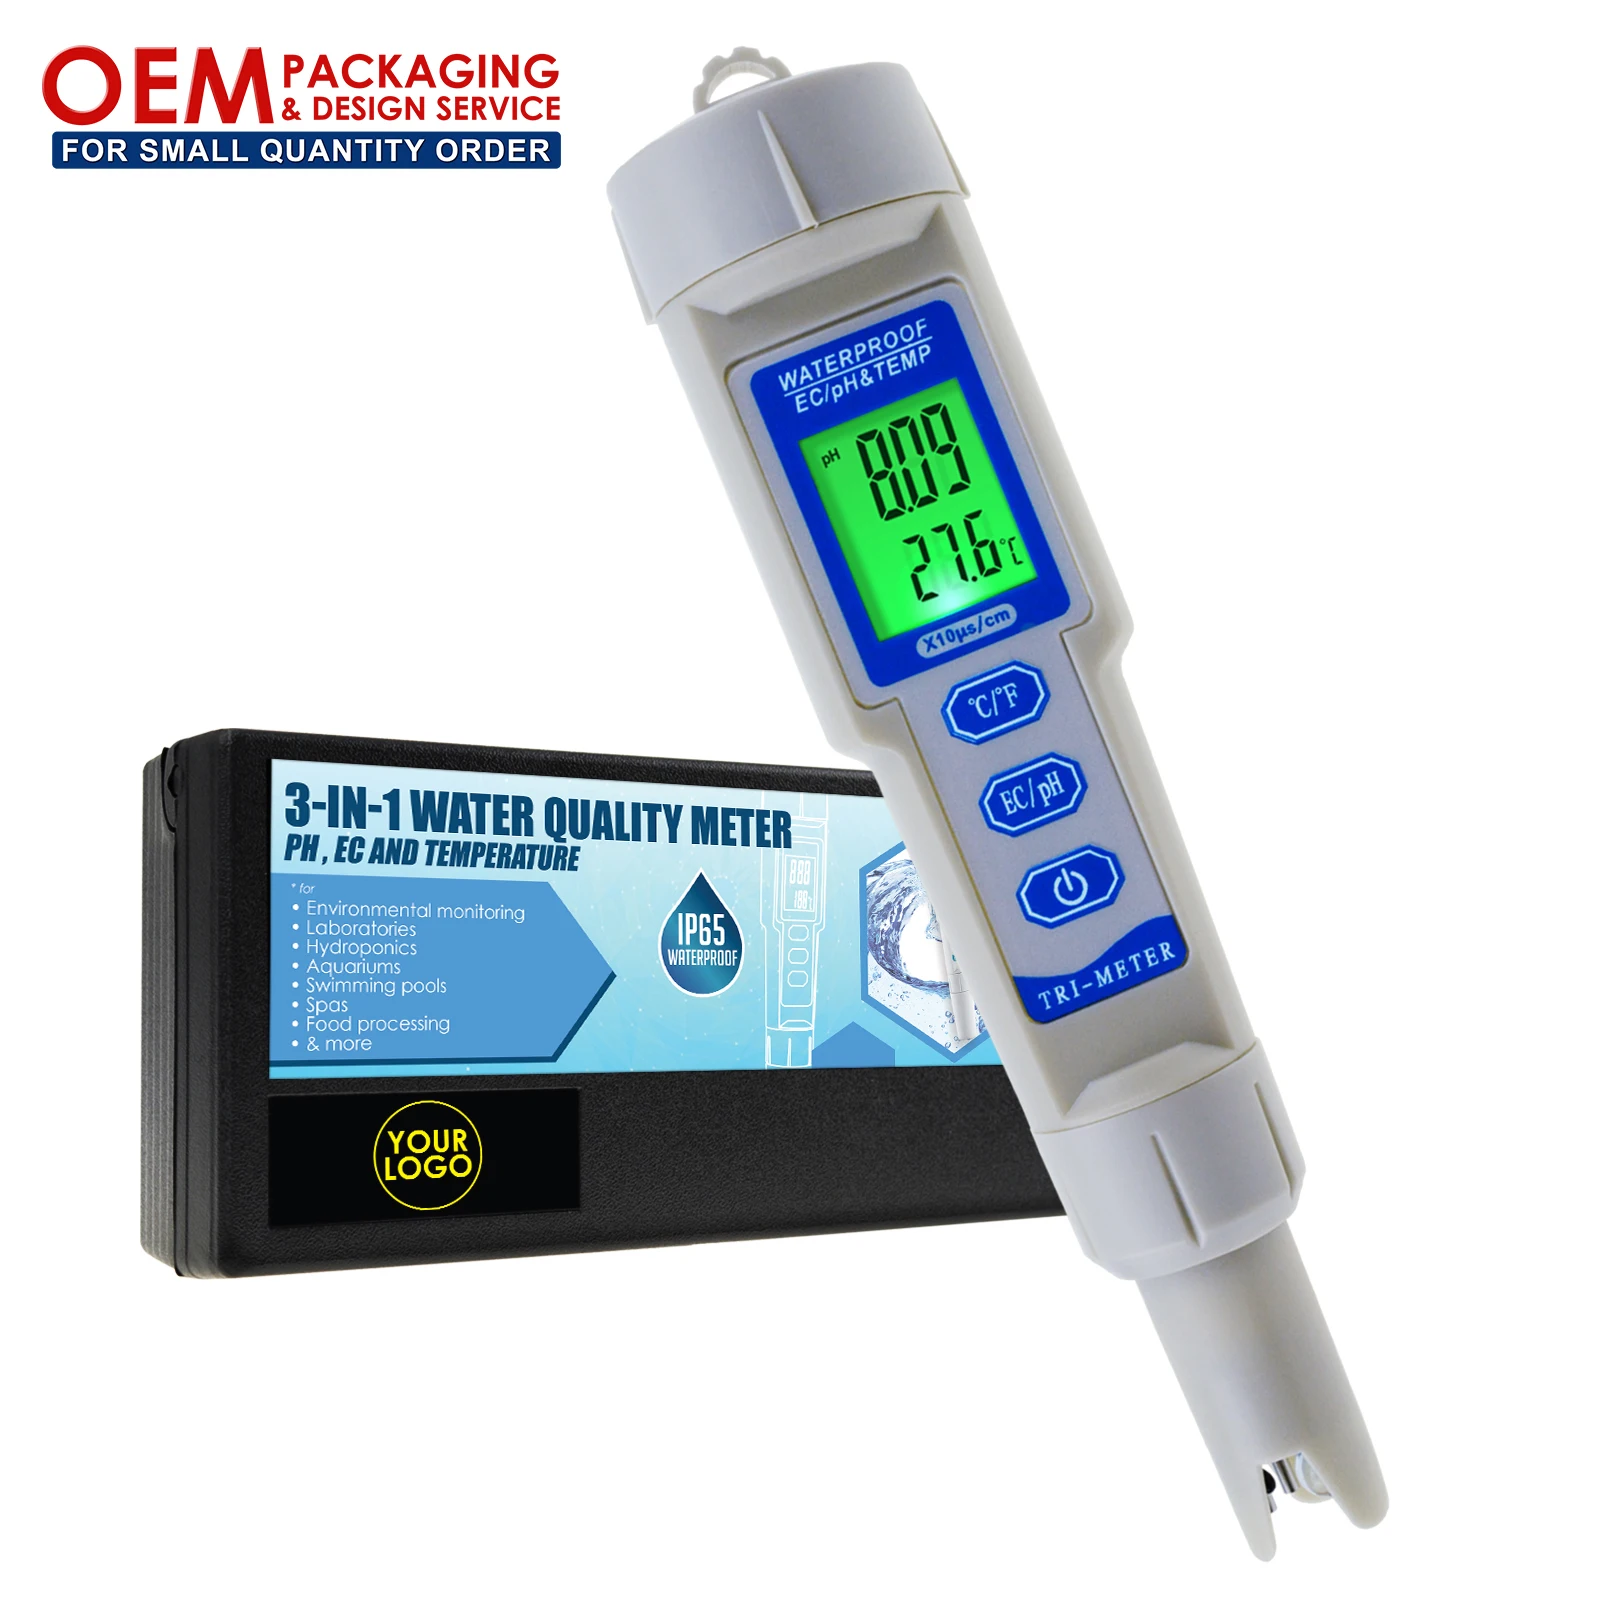 pH/EC/Temperature Meter ATC 3 in 1 Waterproof Pen Type Water Quality Combo Multi-Parameter Tester Monitor Analyzer Acidometer Test Kit for Aquariums Hydroponics Pool Spa Drinking Purity 